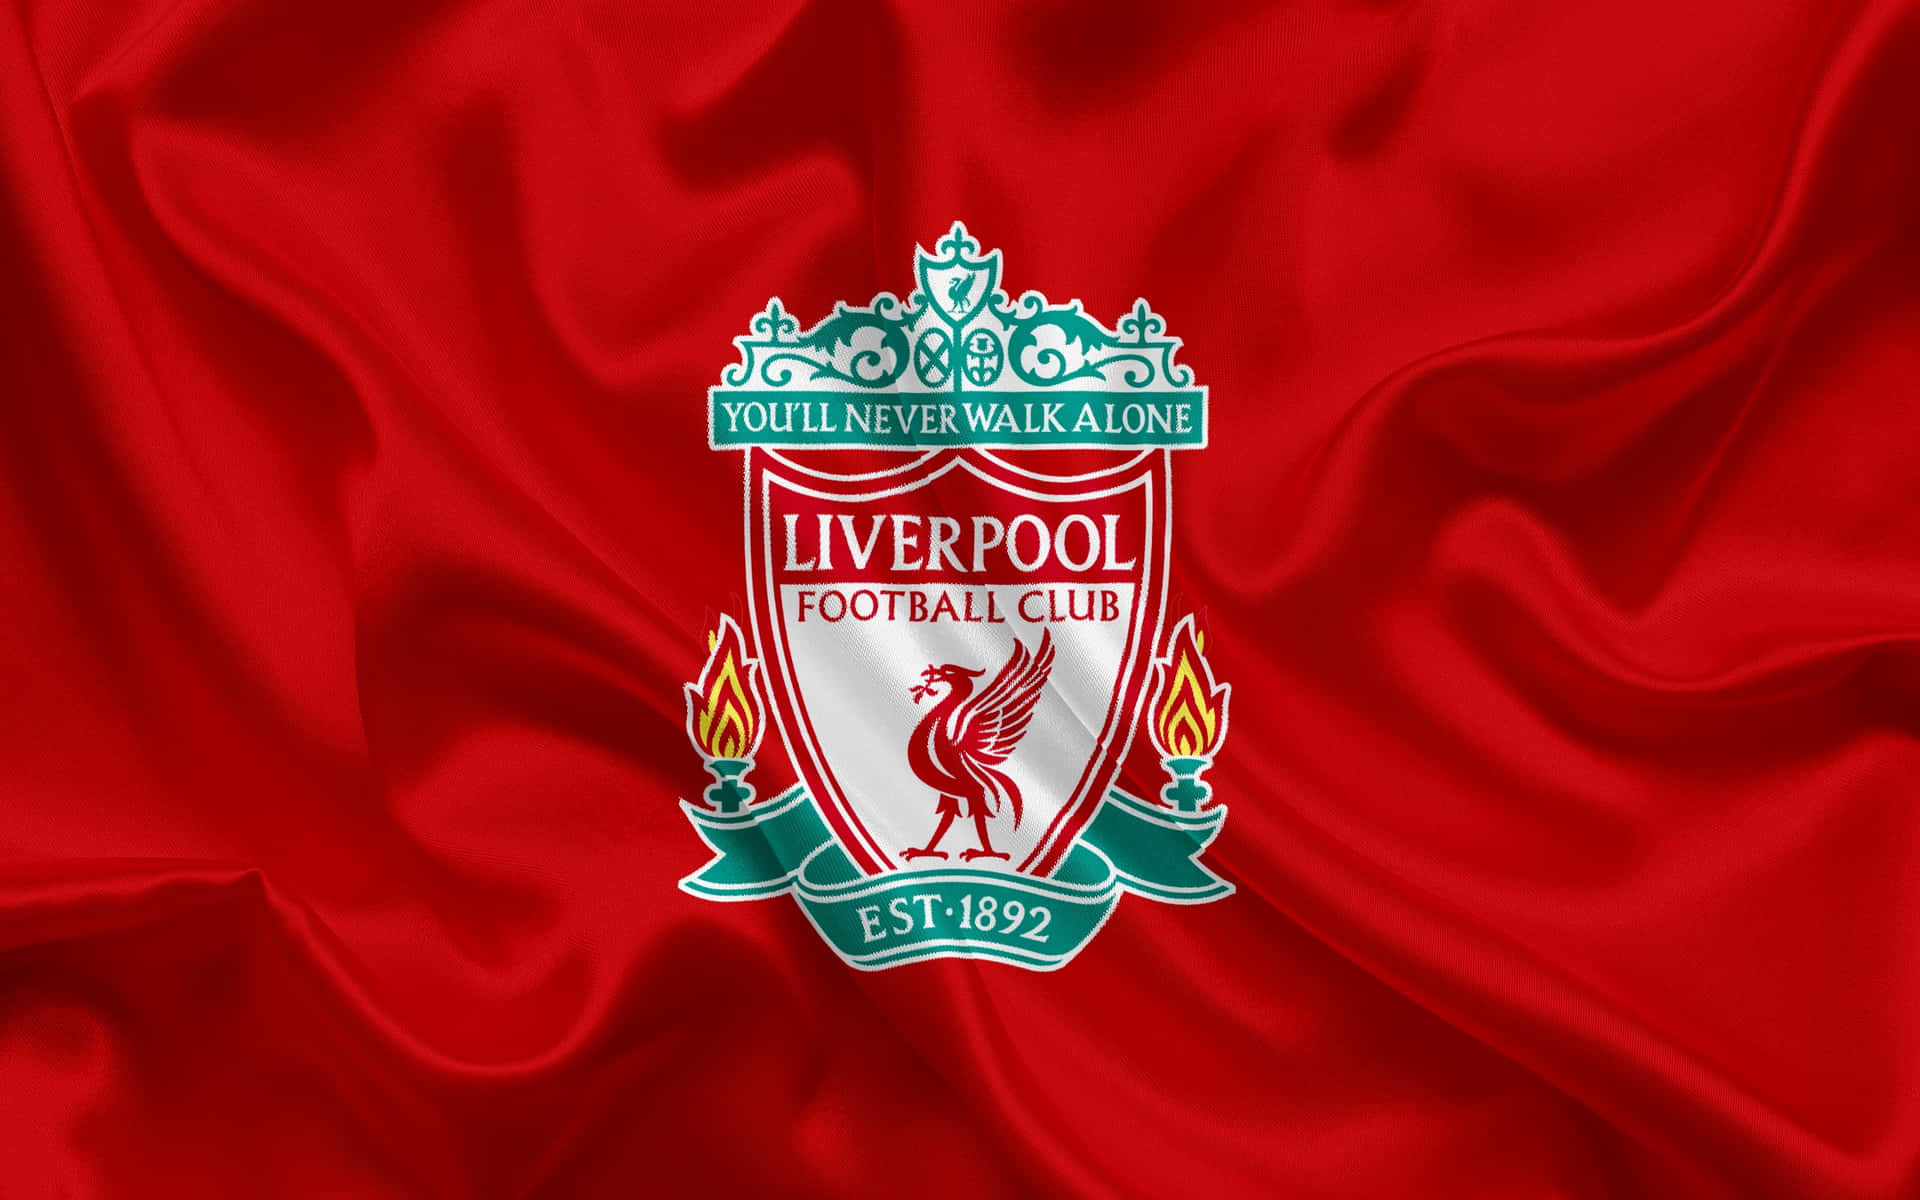 Show your pride for Liverpool Football Club with the official team logo Wallpaper